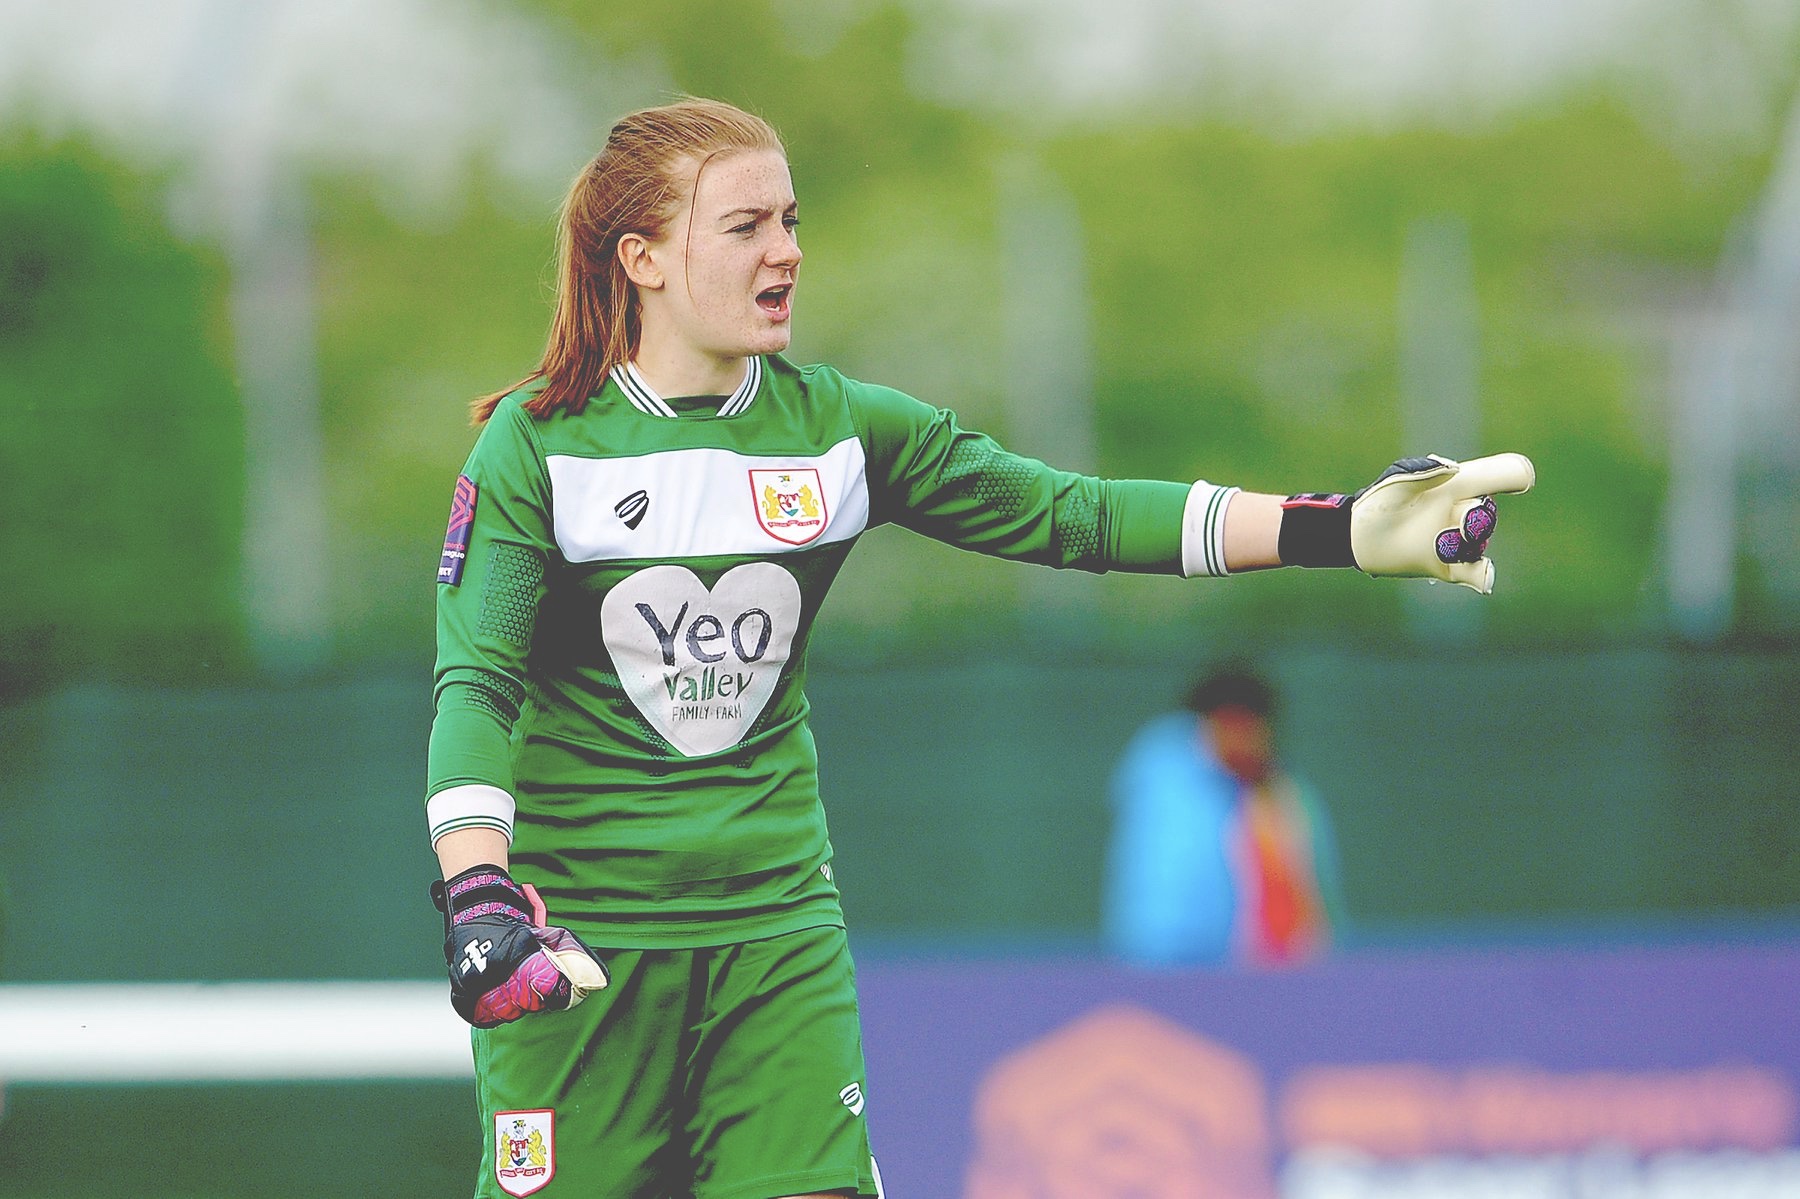 Bristol City's Sophie Baggaley was also named in the PFA team of the season.